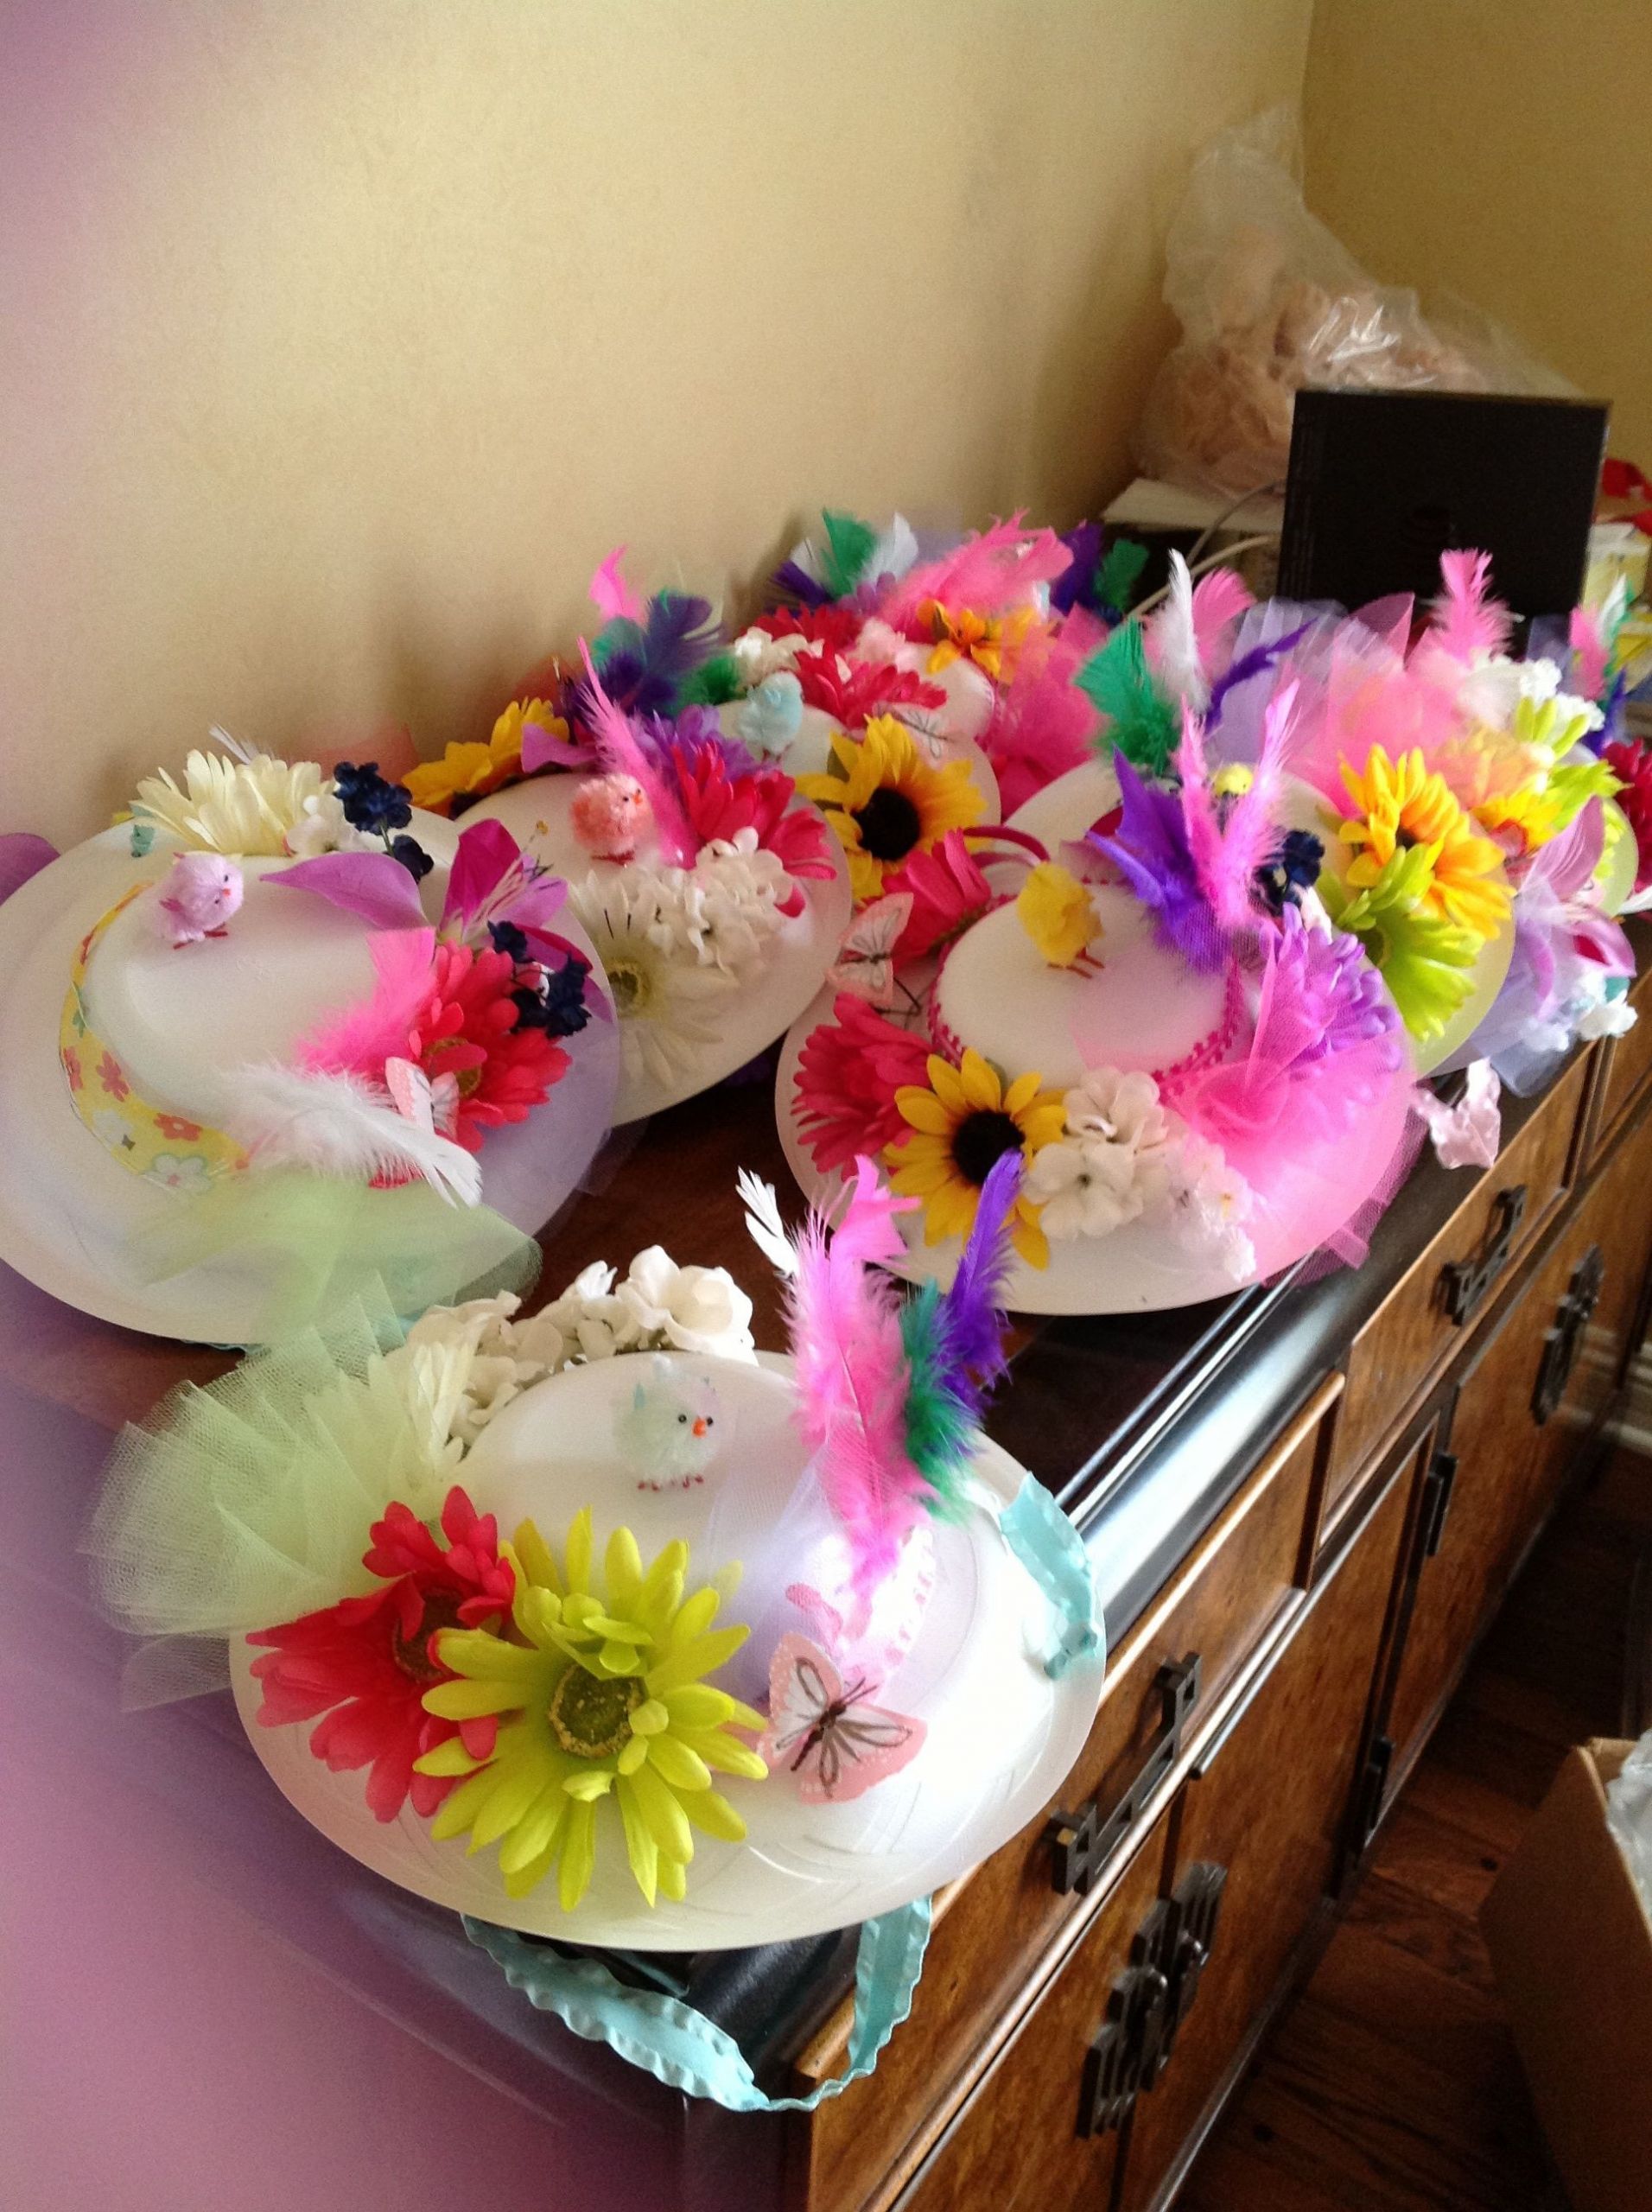 Tea Party Craft Ideas
 I had my troop make tea party hats from Dixie plates for a